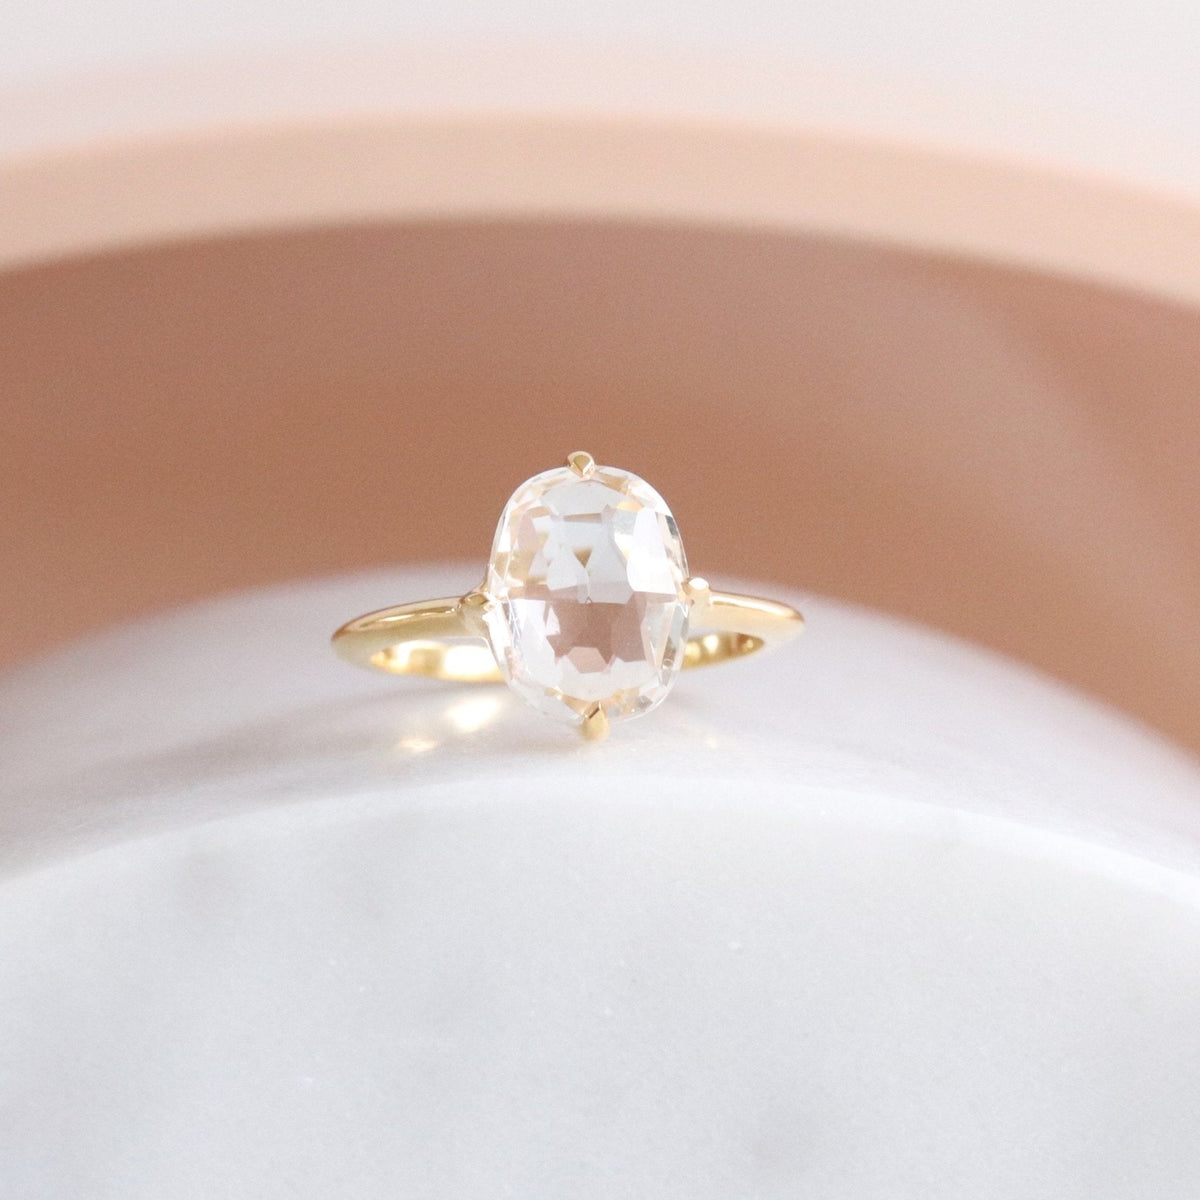 14K SOLID GOLD - KIND OVAL SOLITAIRE RING - WHITE TOPAZ - SO PRETTY CARA COTTER